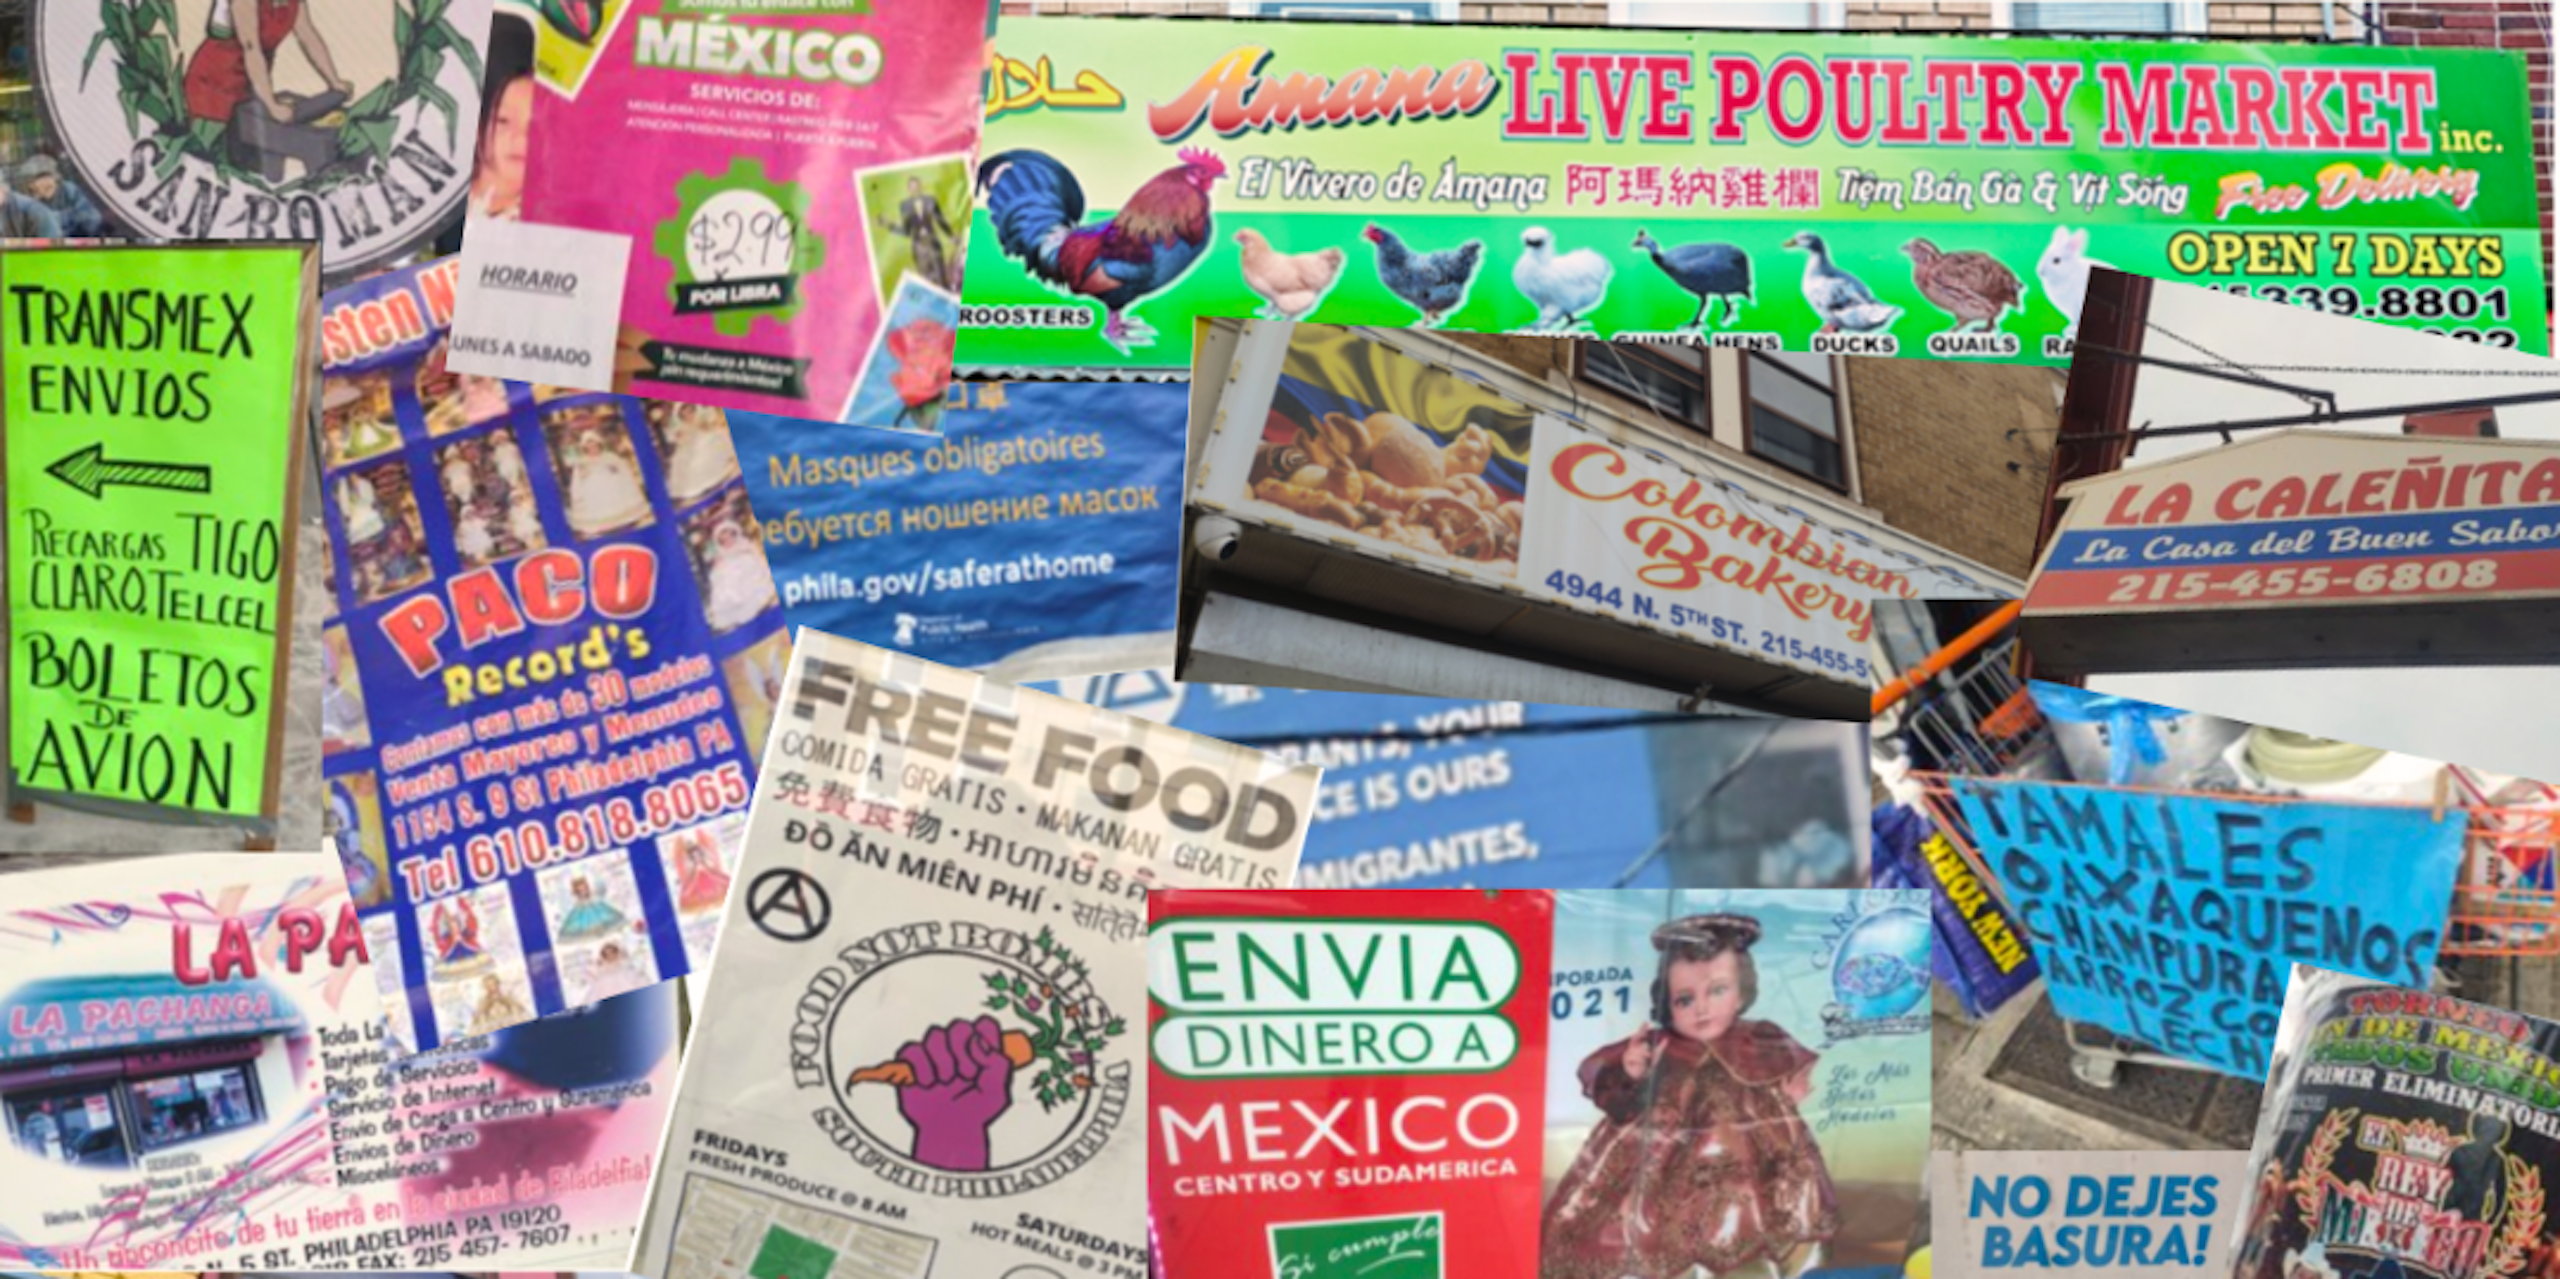 A collage of public signs written in Spanish, English and other languages